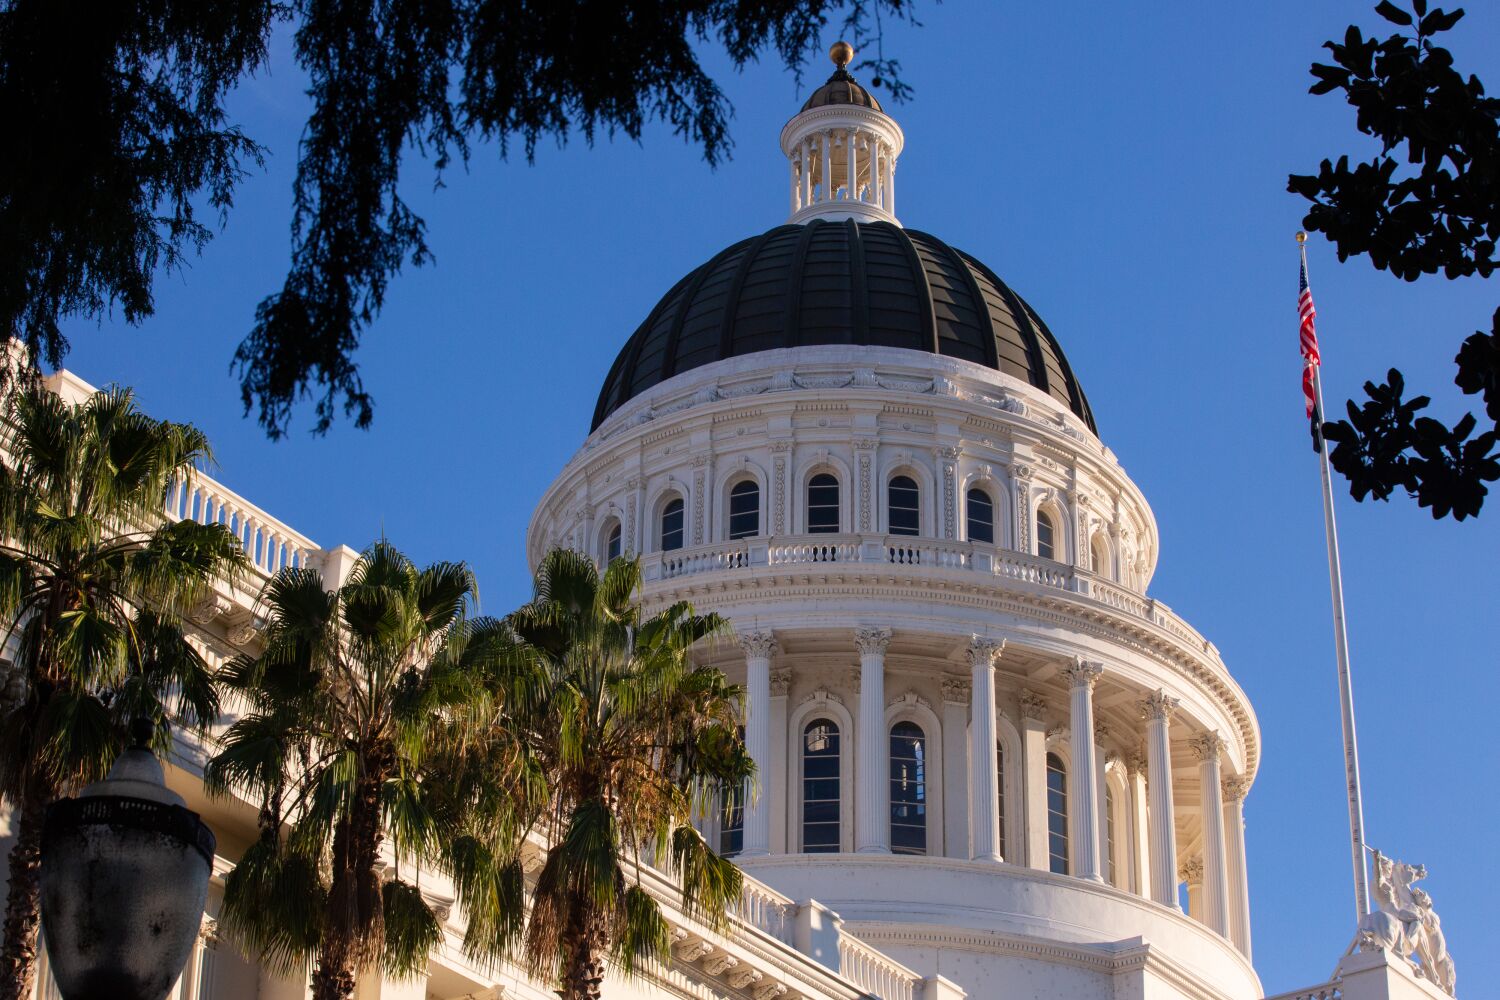 Settlement challenges confidentiality in sexual misconduct probes at state Capitol